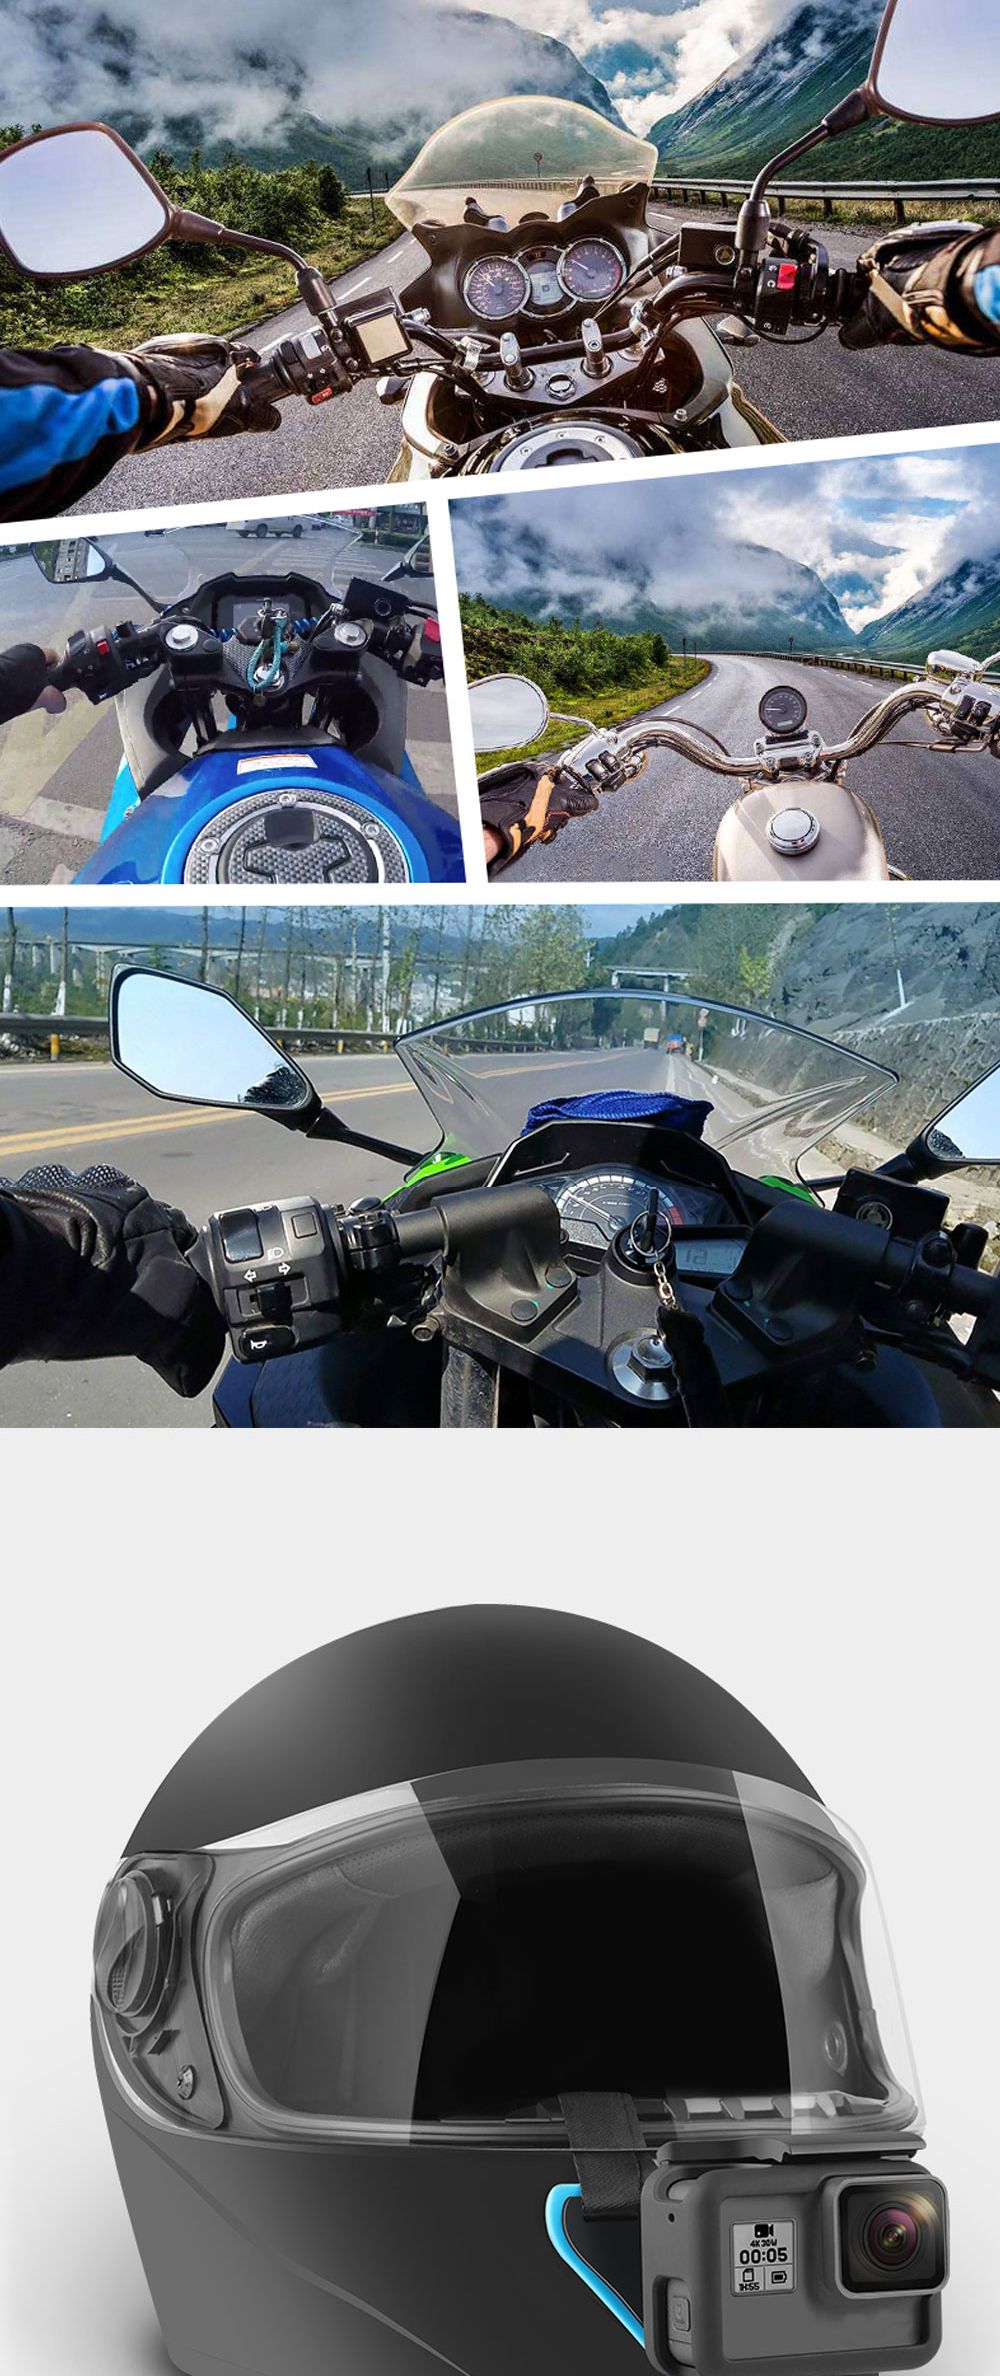 Motorcycle-Helmet-Chin-Support-Mount-Holder-for-GoPro-Hero-8-7-6-5-4-3-Sports-Camera-Holder-Accessor-1695127